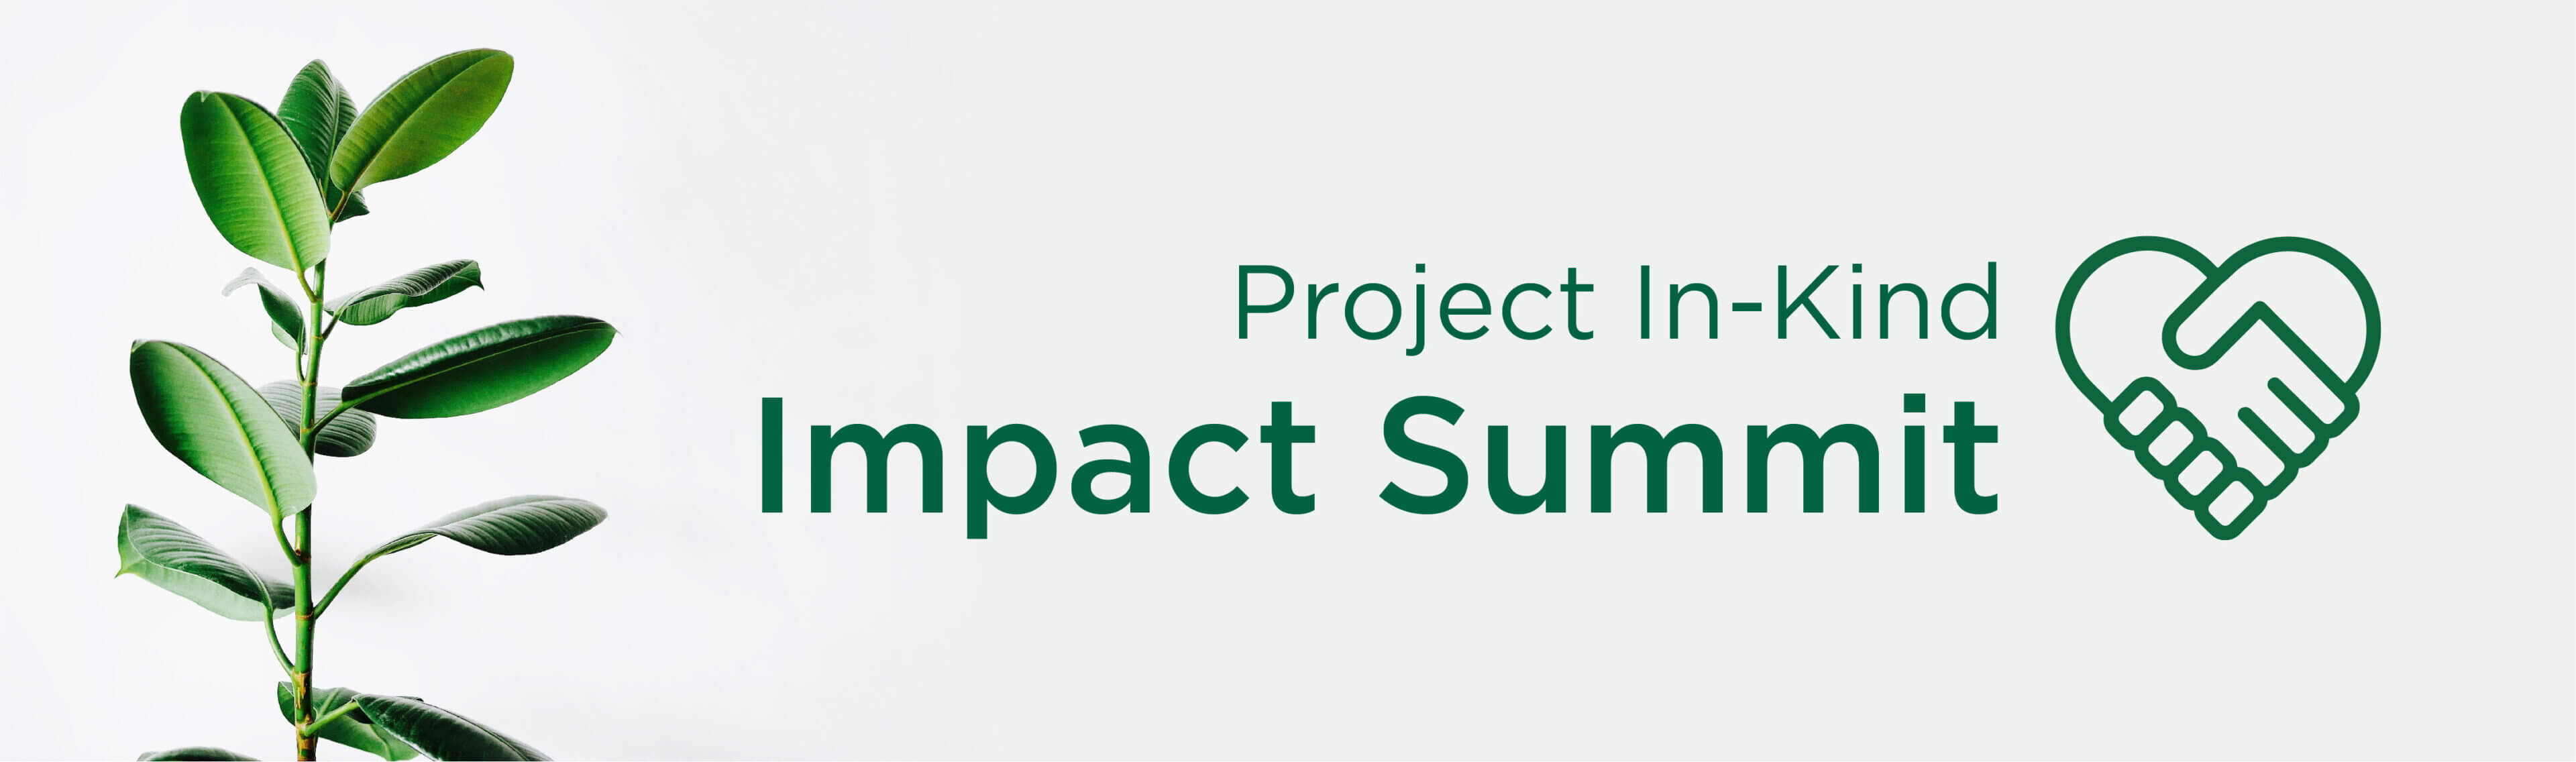 Project In-Kind Impact Summit Header